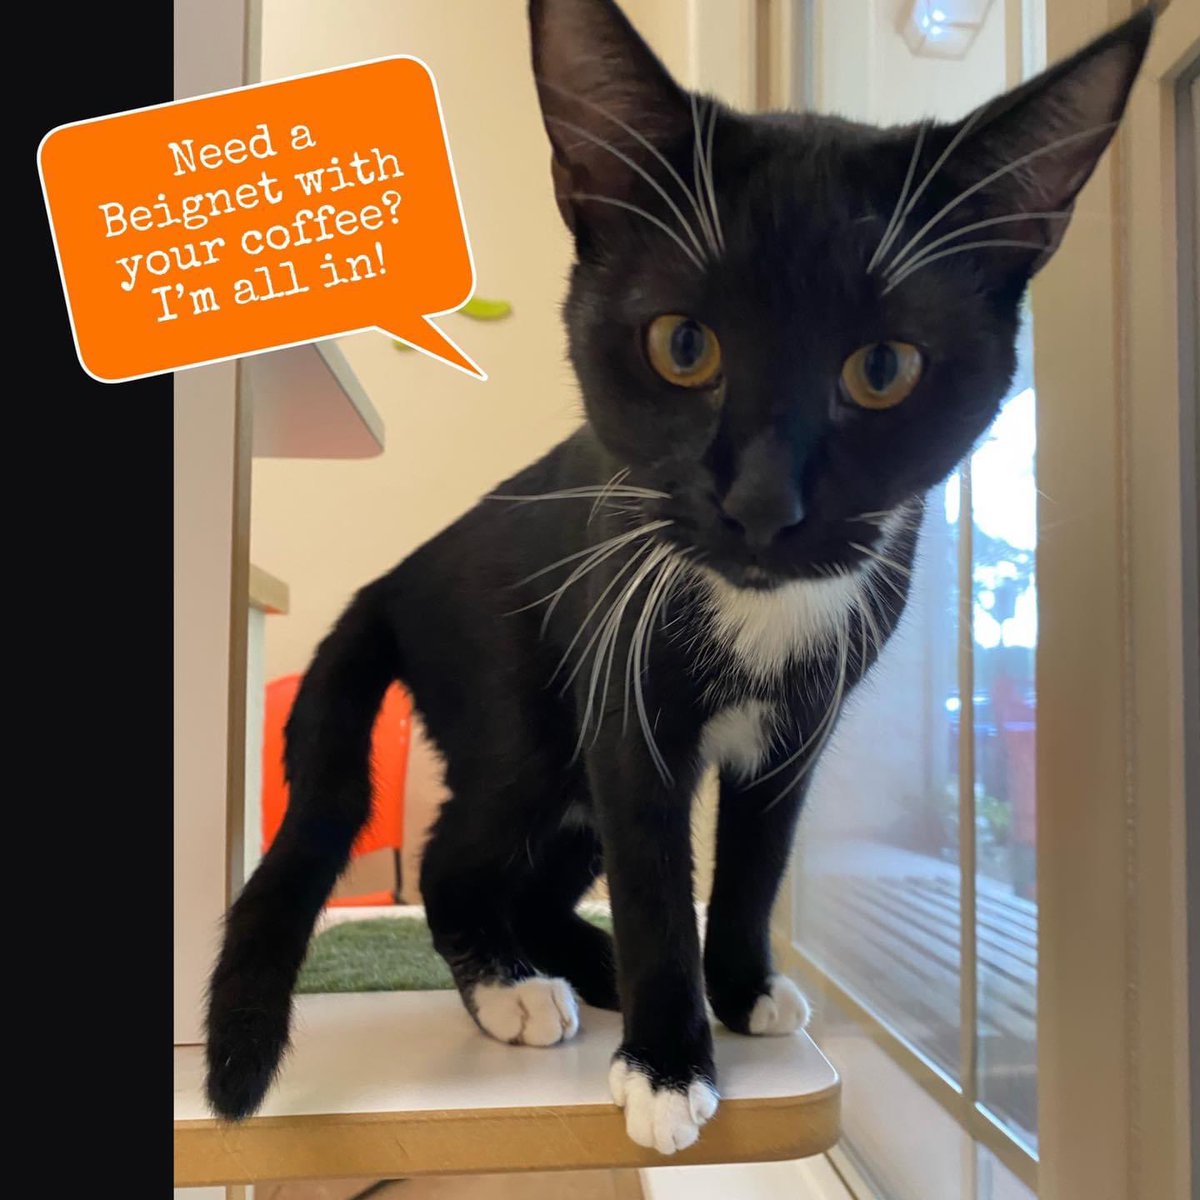 Beignets are great any time of day, right? Our BEIGNET is sweet too and won’t leave powdered sugar all over you. 😉 Female, gorgeous tuxie age 6 months. Come visit us! Our adoption hours are Tuesday to Friday 10-2, Saturday 10-3 and Sunday 11-3.